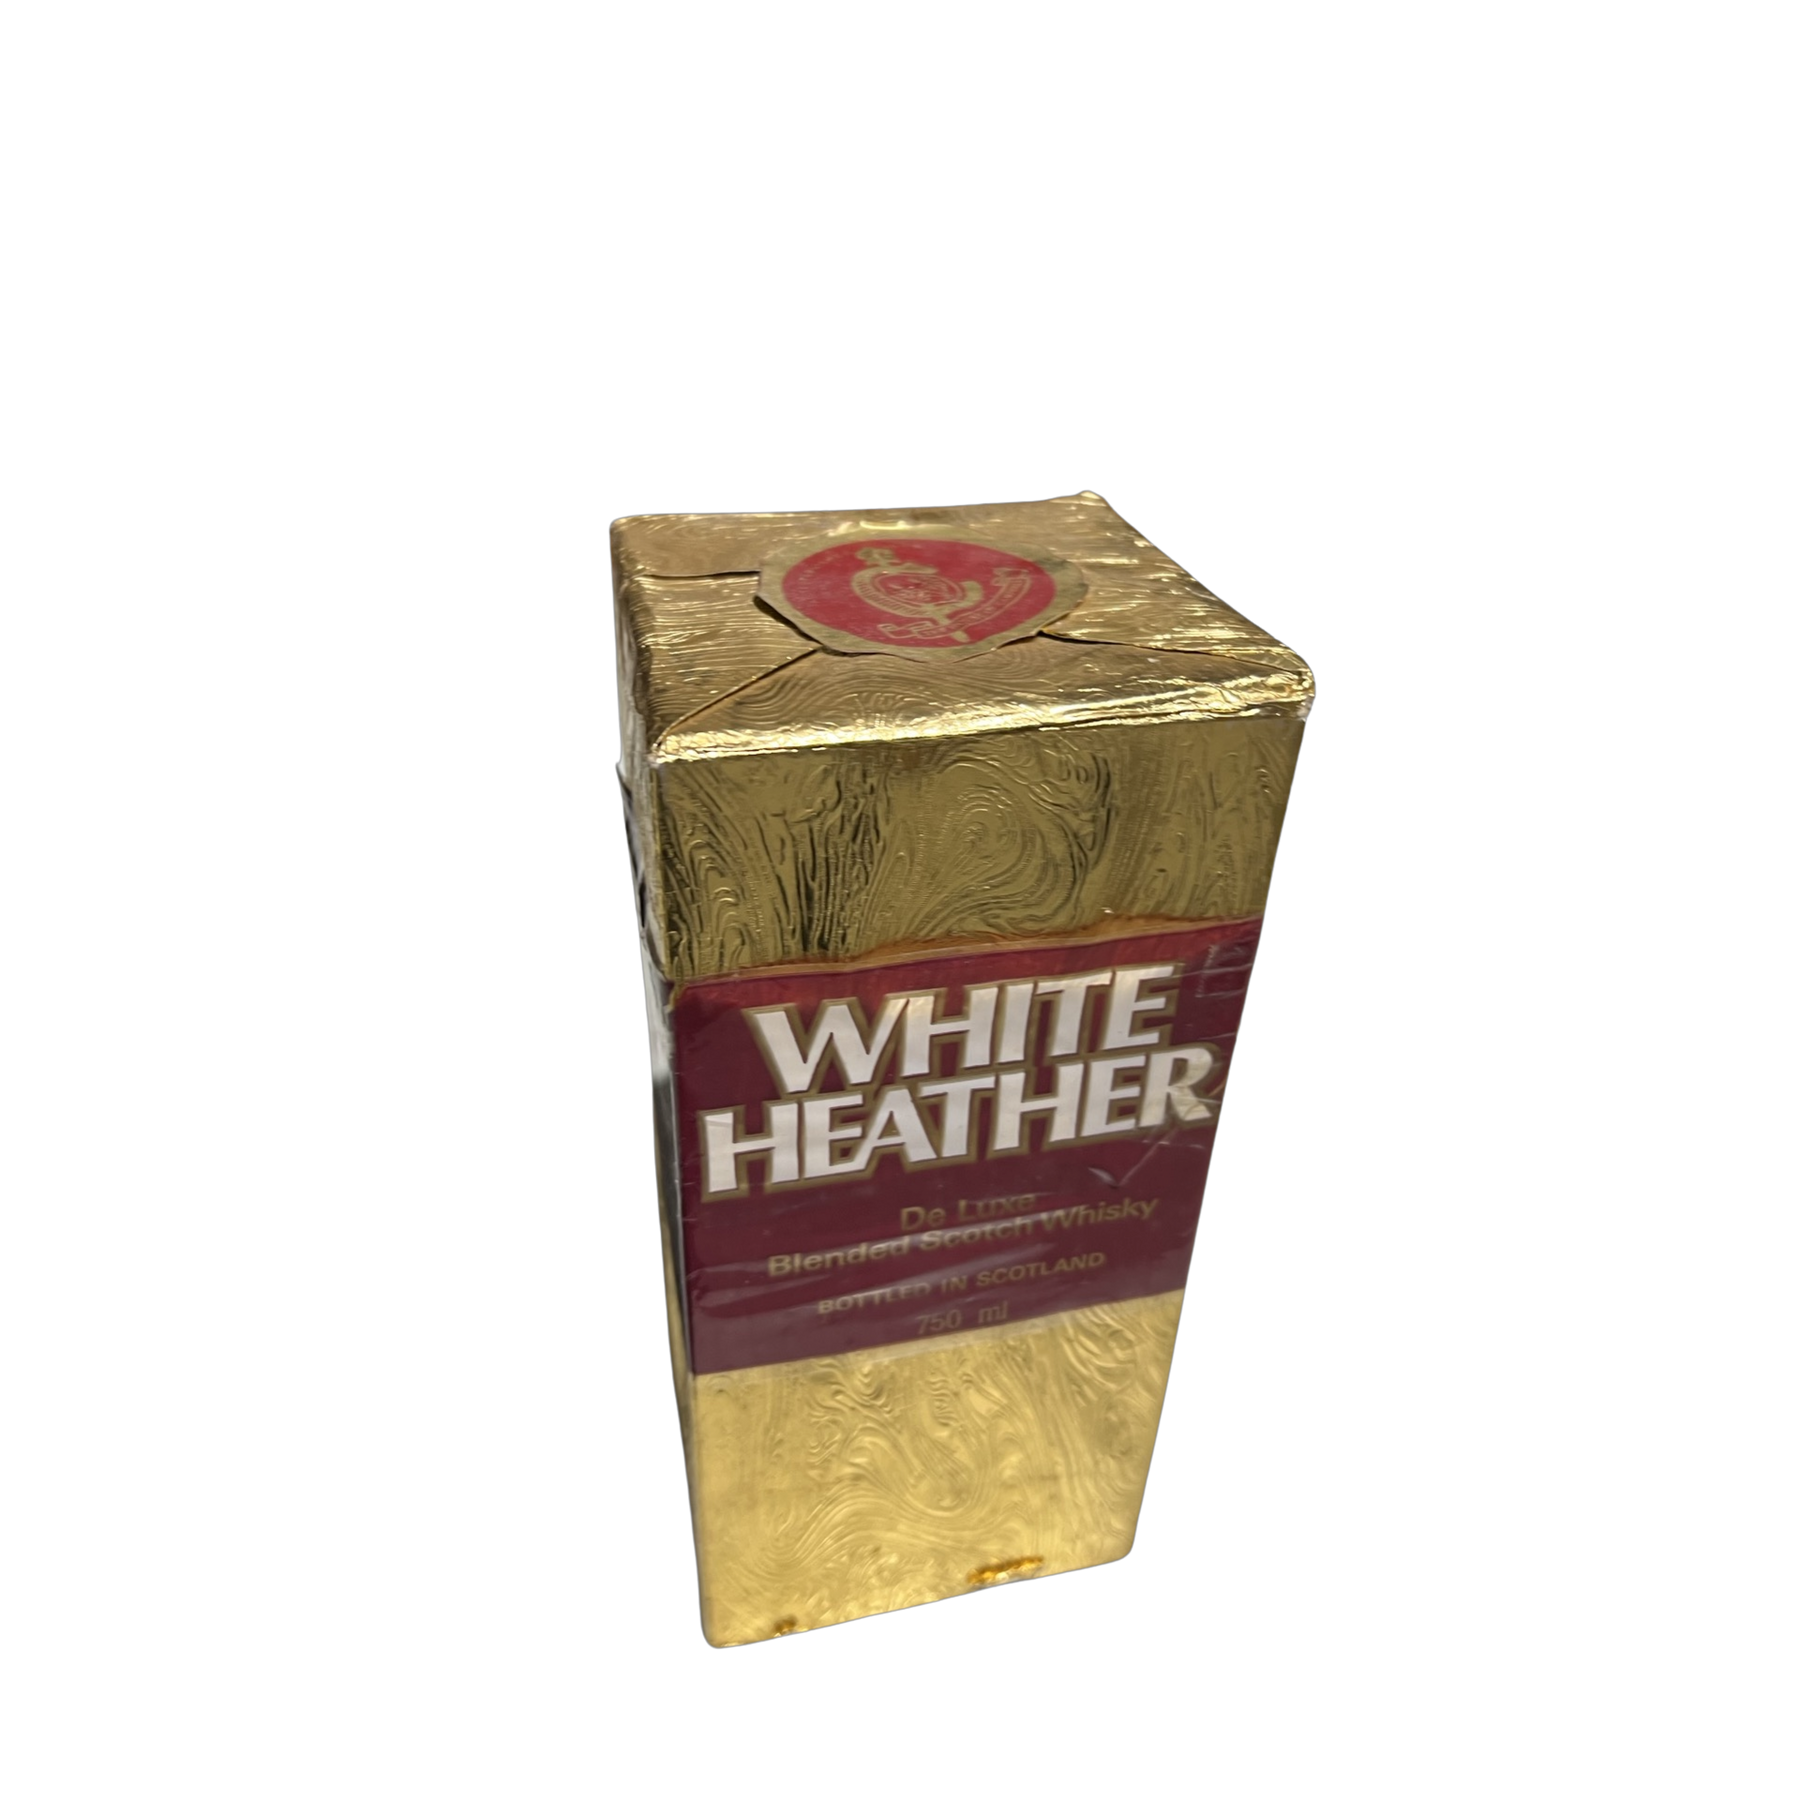 White Heather De Luxe Belnded Scotch Whisky 750ml (Vintage)